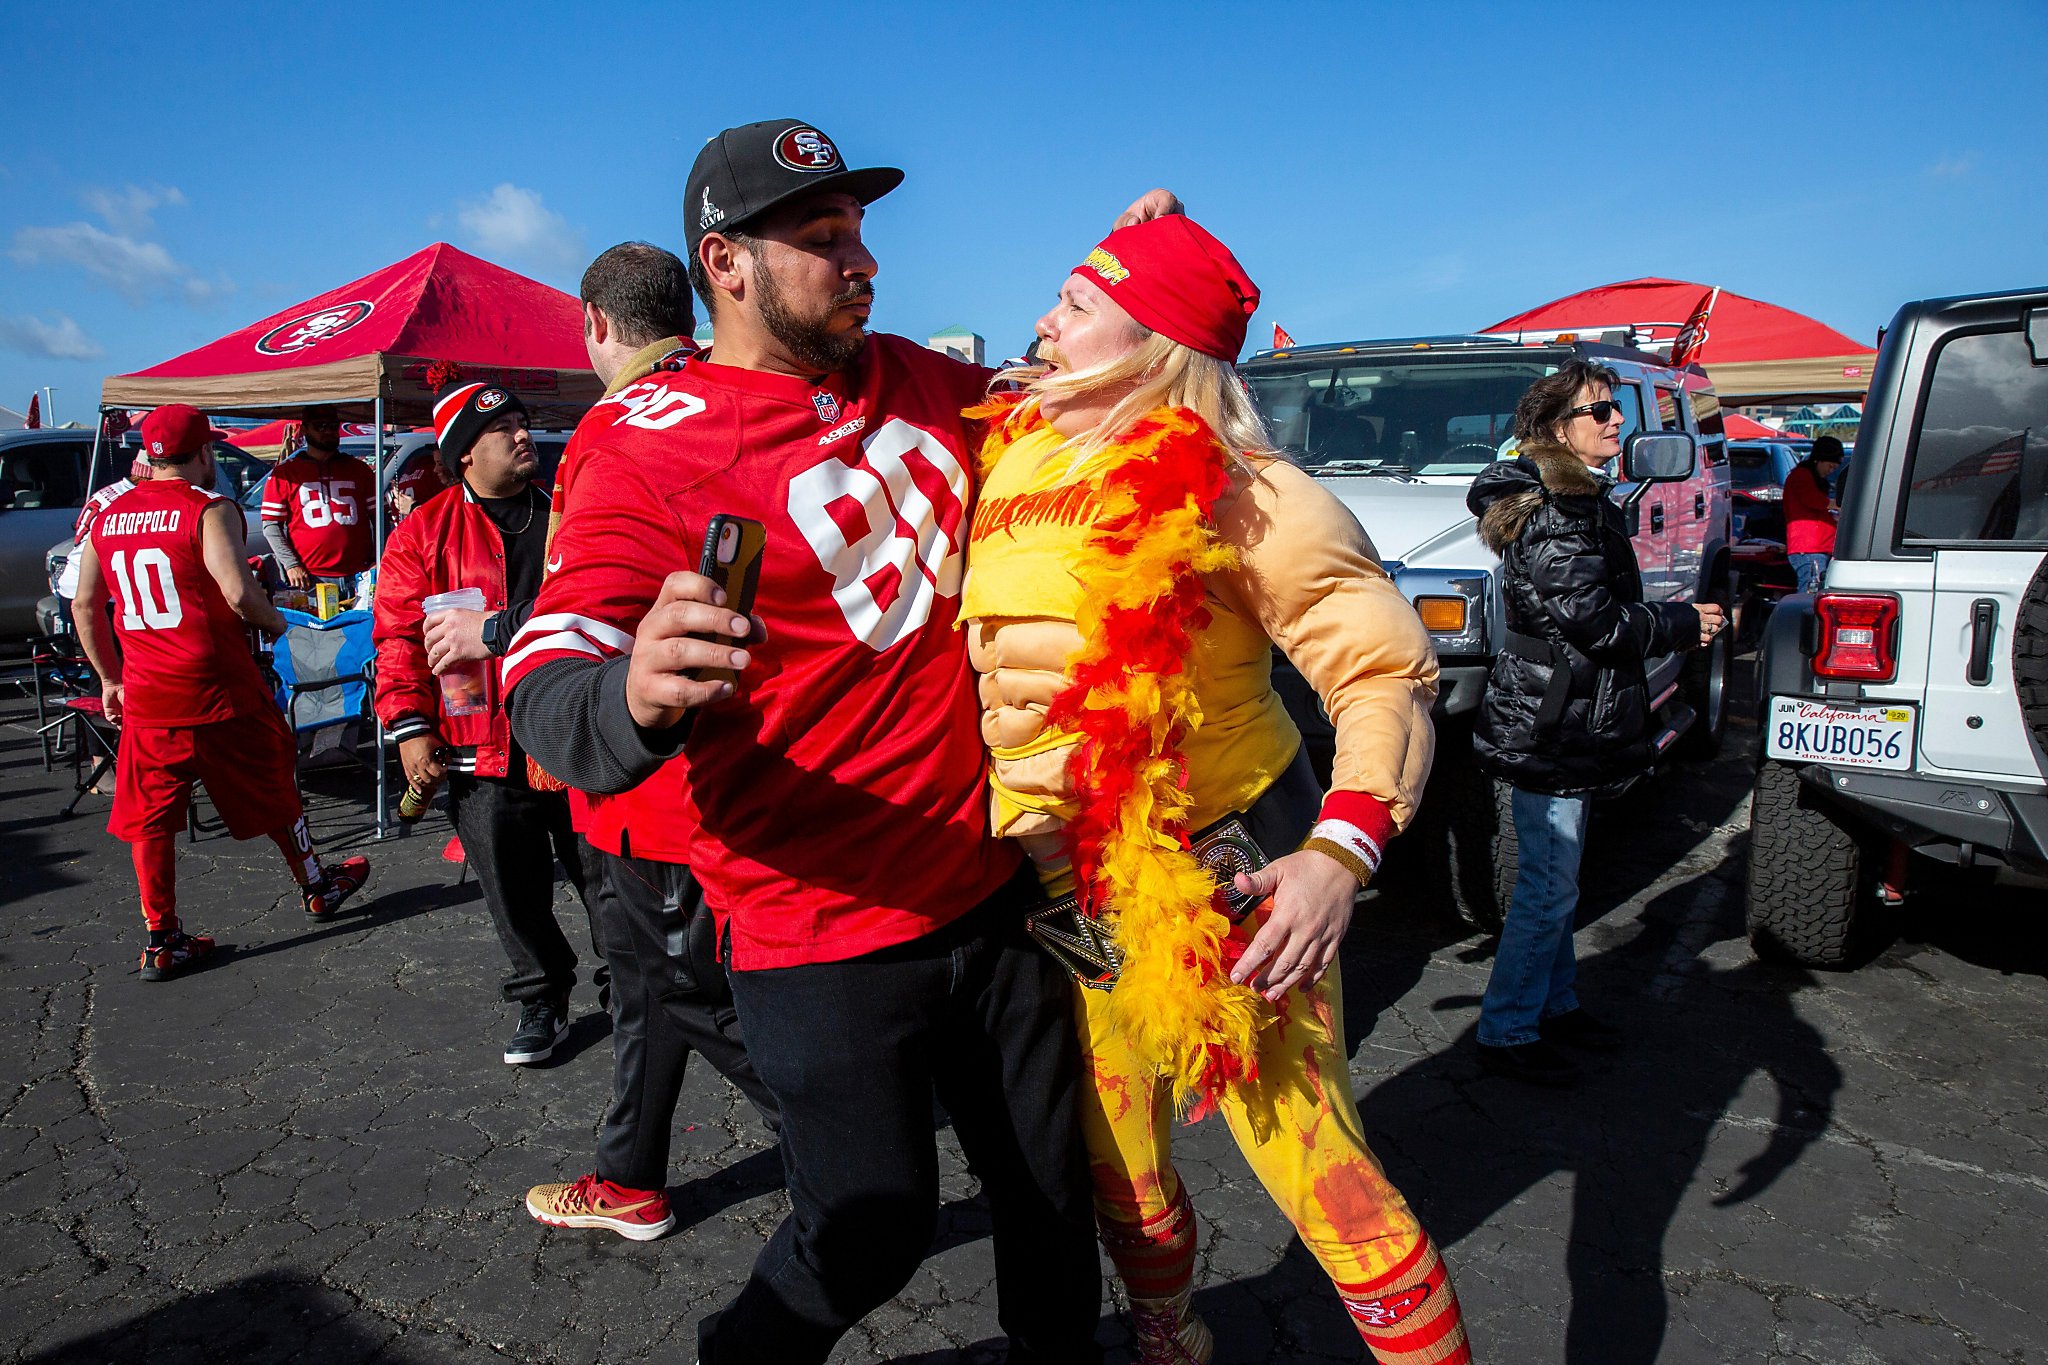 49ers fans start party early at first playoff game in Levi's Stadium history